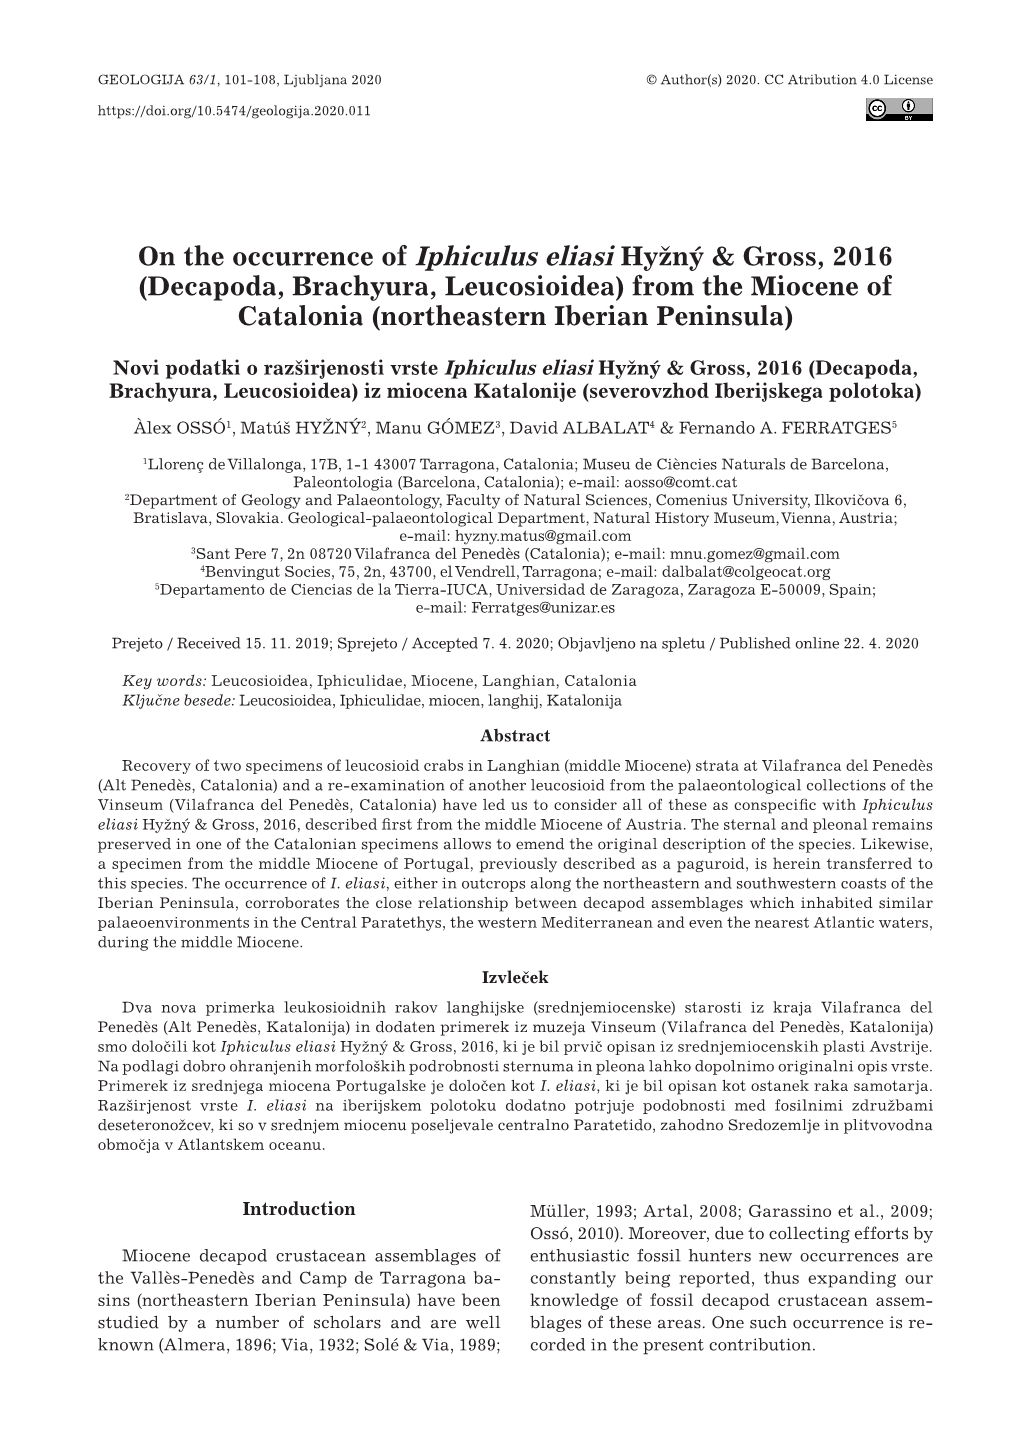 On the Occurrence of Iphiculus Eliasi Hyžný & Gross, 2016 (Decapoda